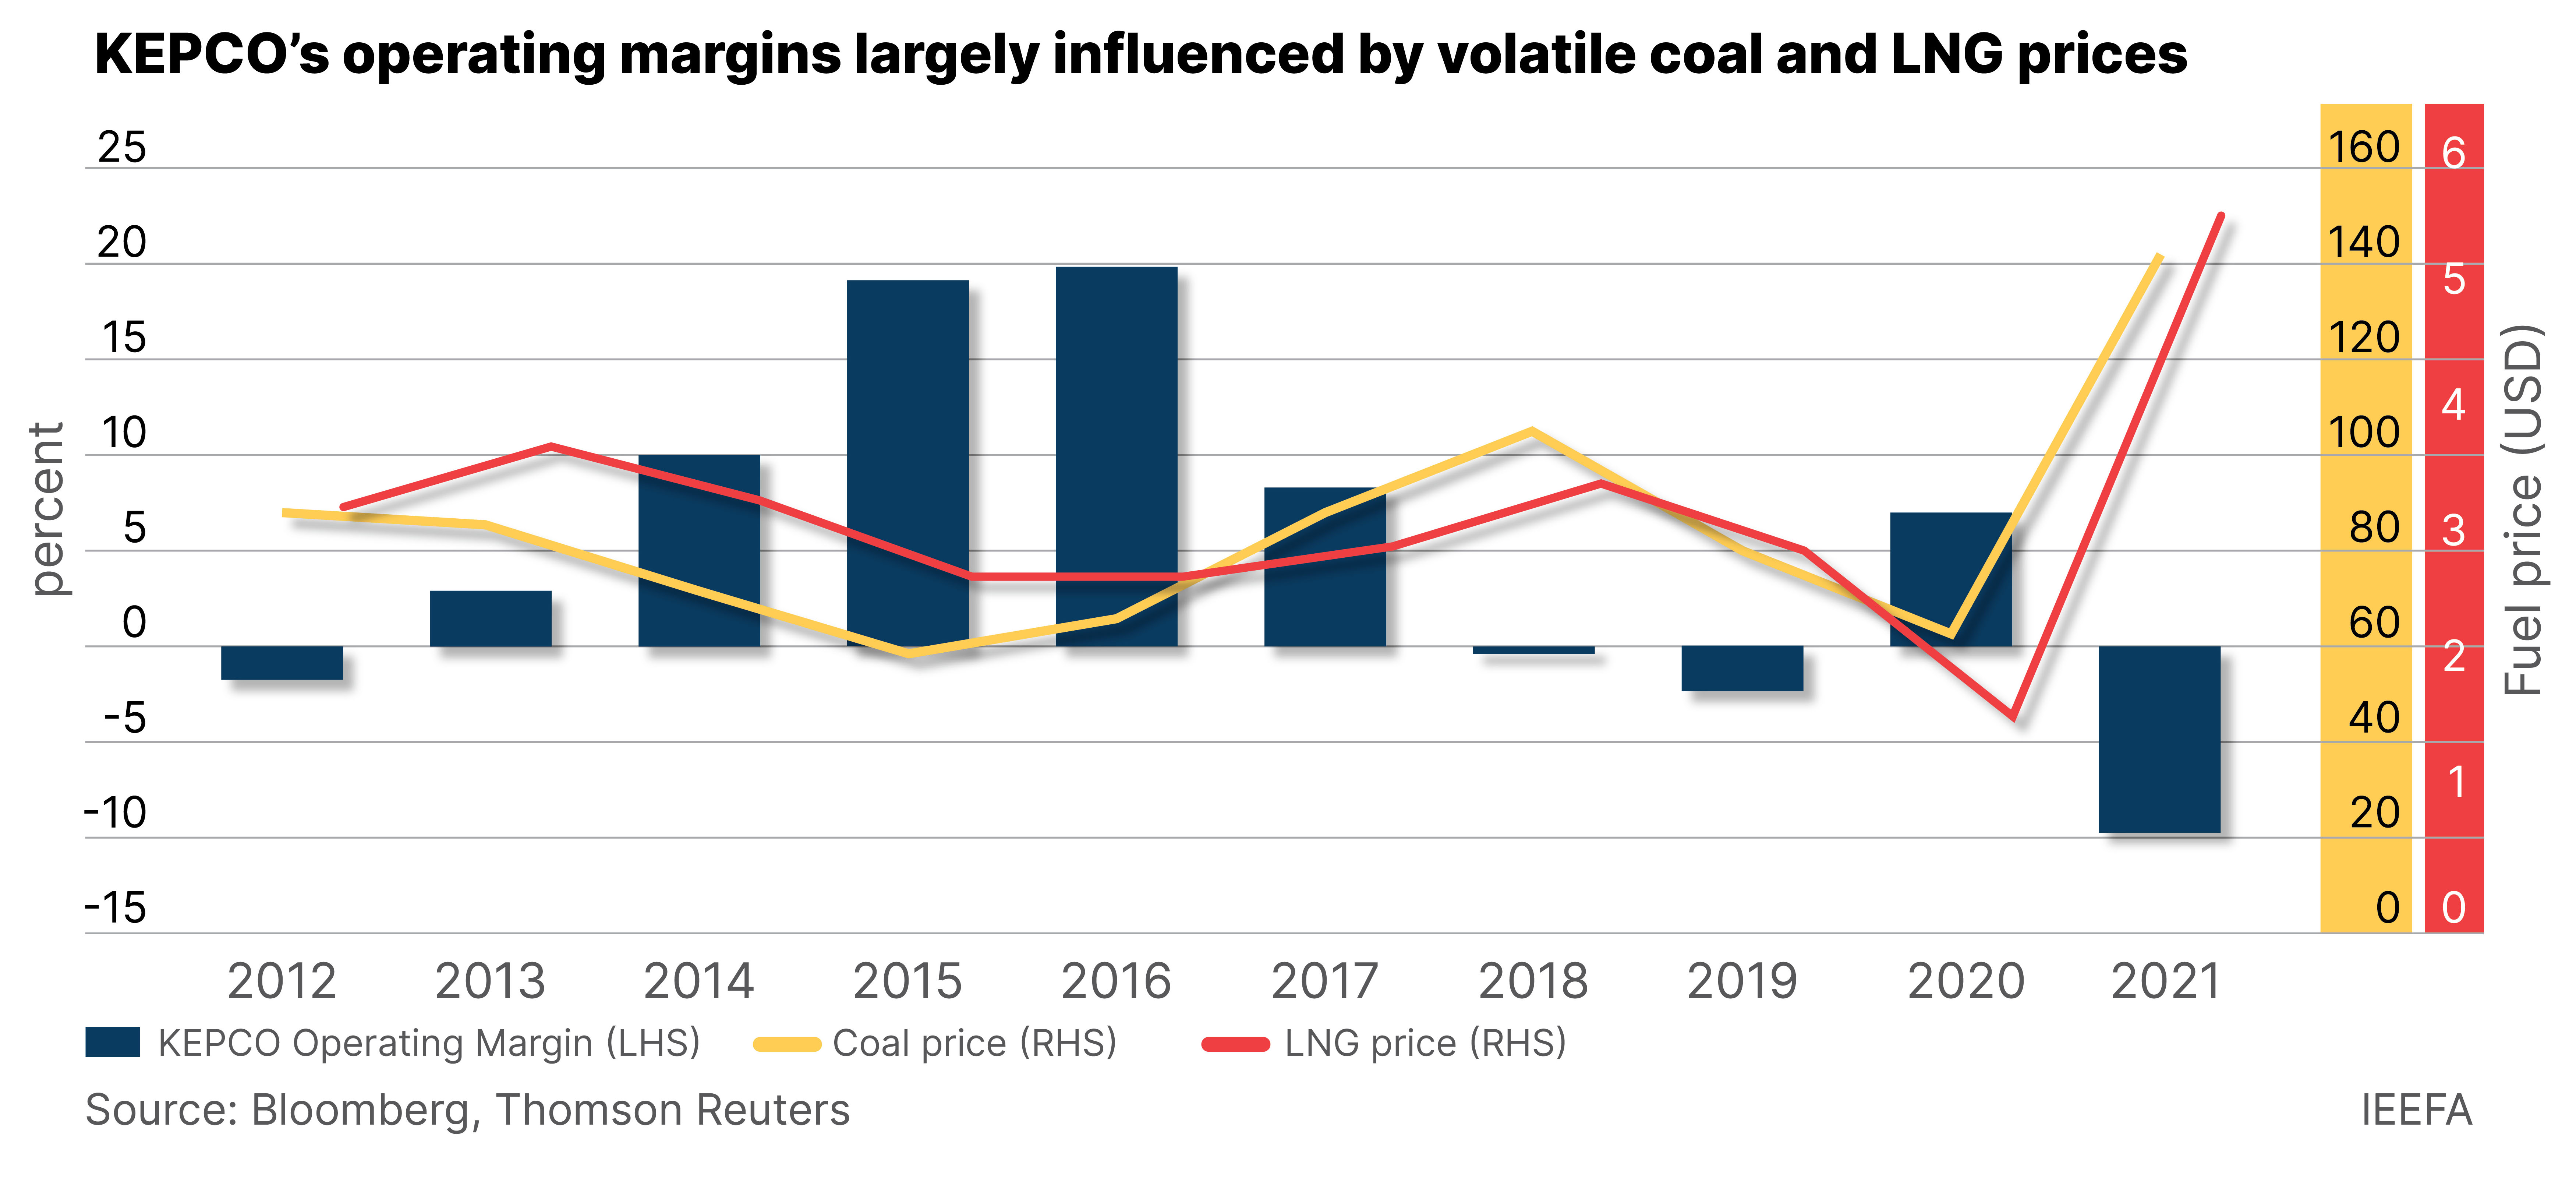 KEPCO's operating margins largely influenced by volatile coal and LNG prices